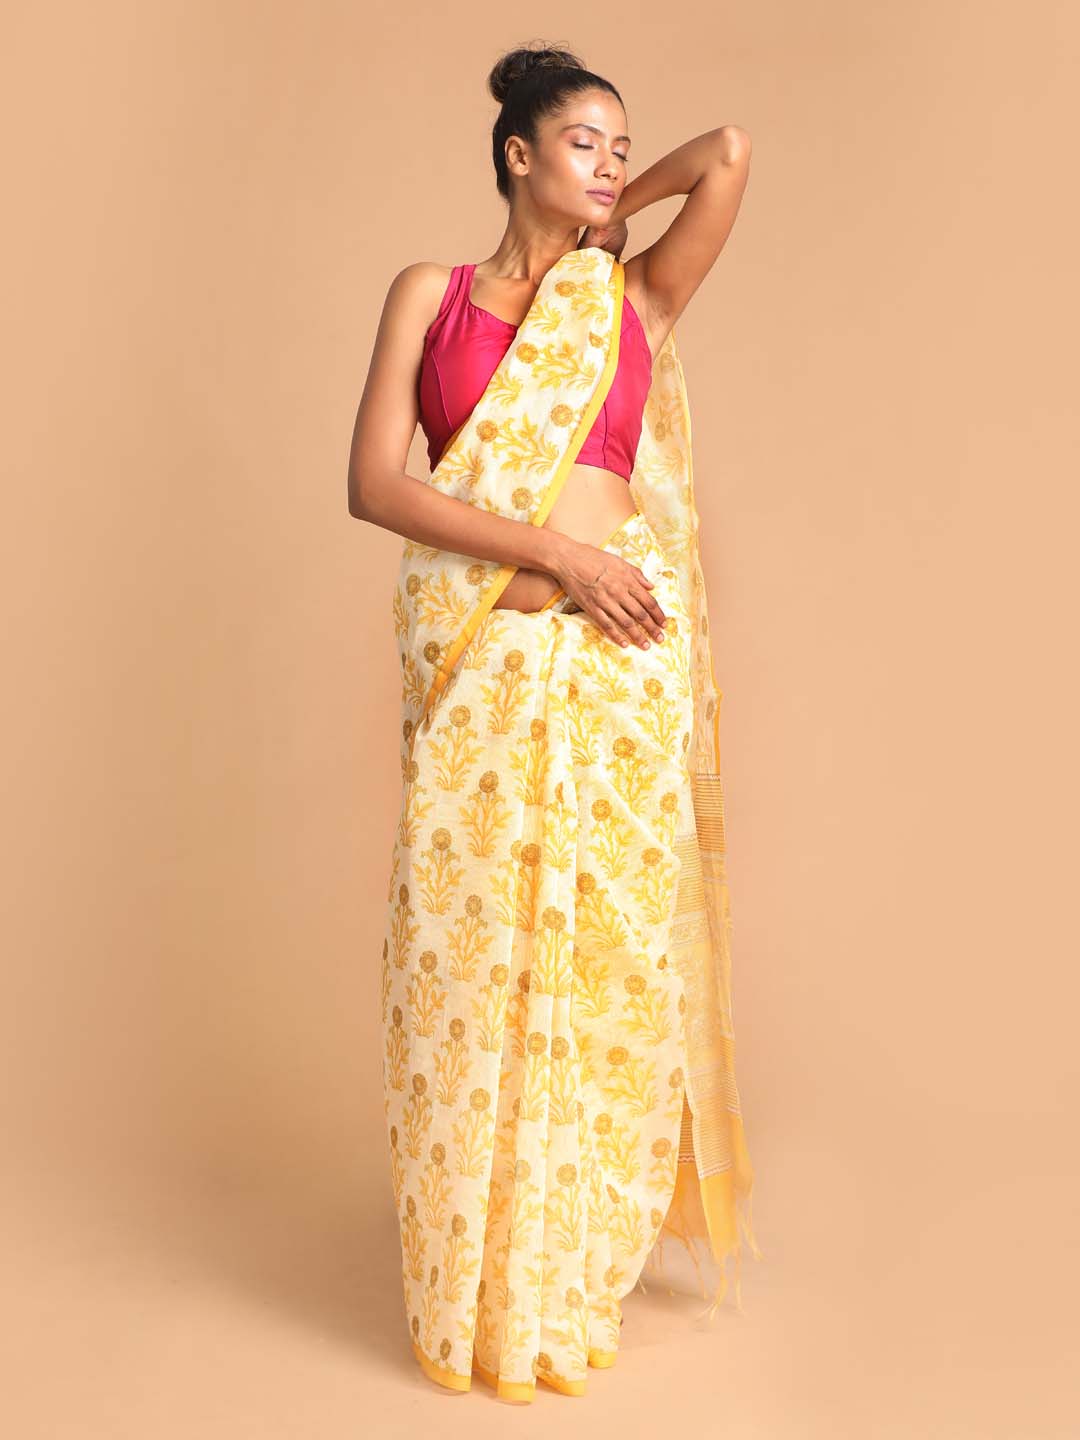 Indethnic Printed Super Net Saree in Yellow - View 1